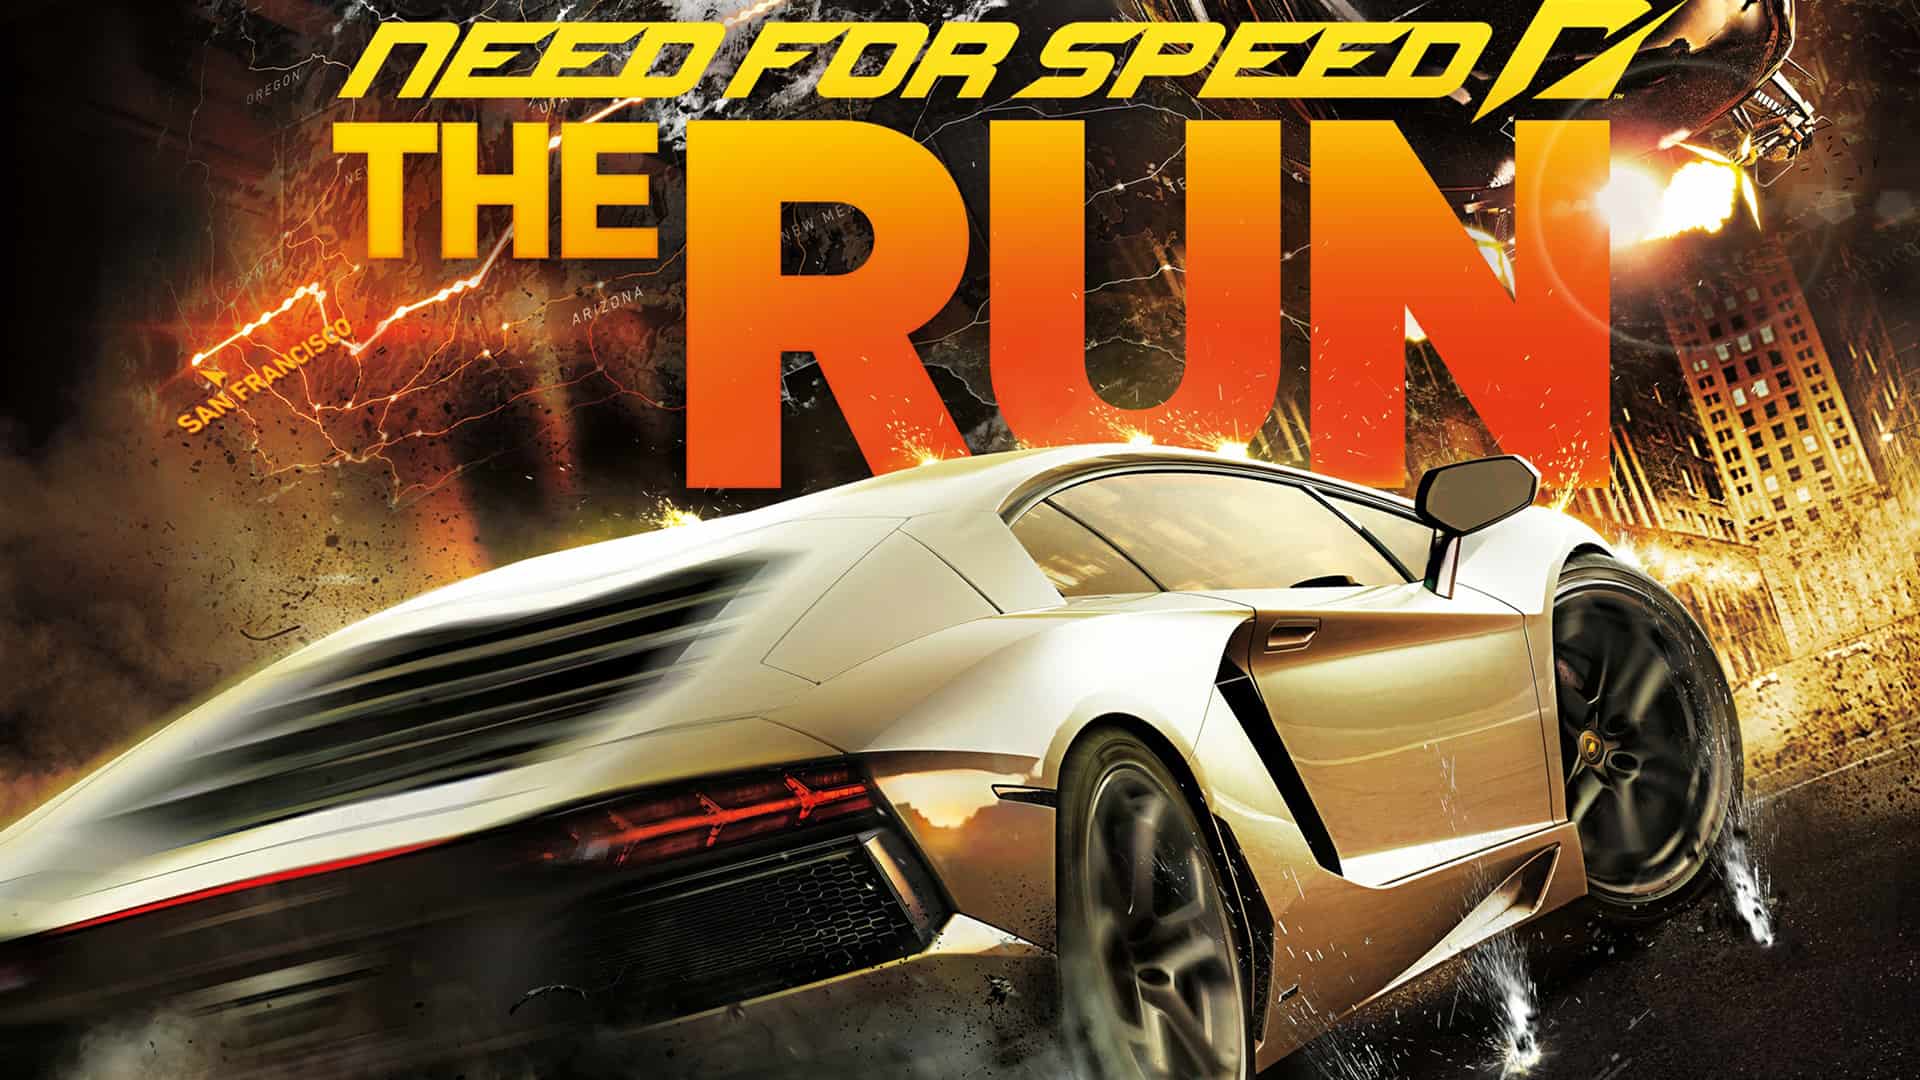 Download [VERIFIED] Loc Zip For Need For Speed The Run English Torrent